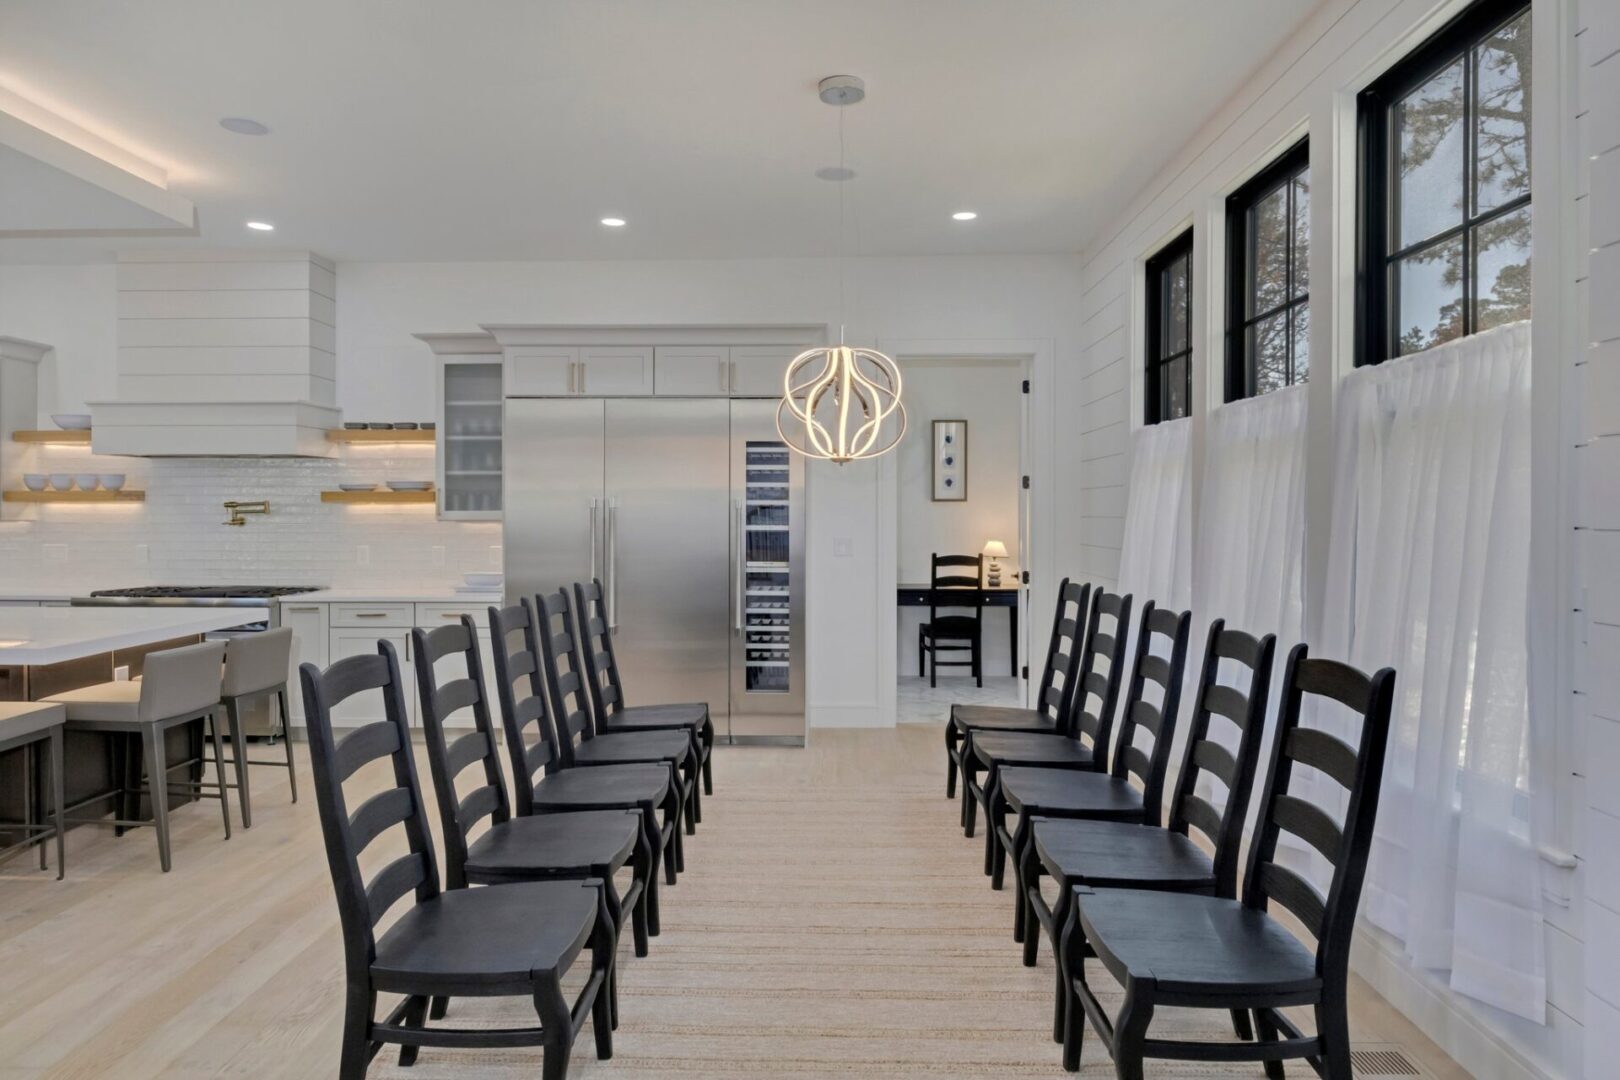 A long line of black chairs in front of a kitchen.